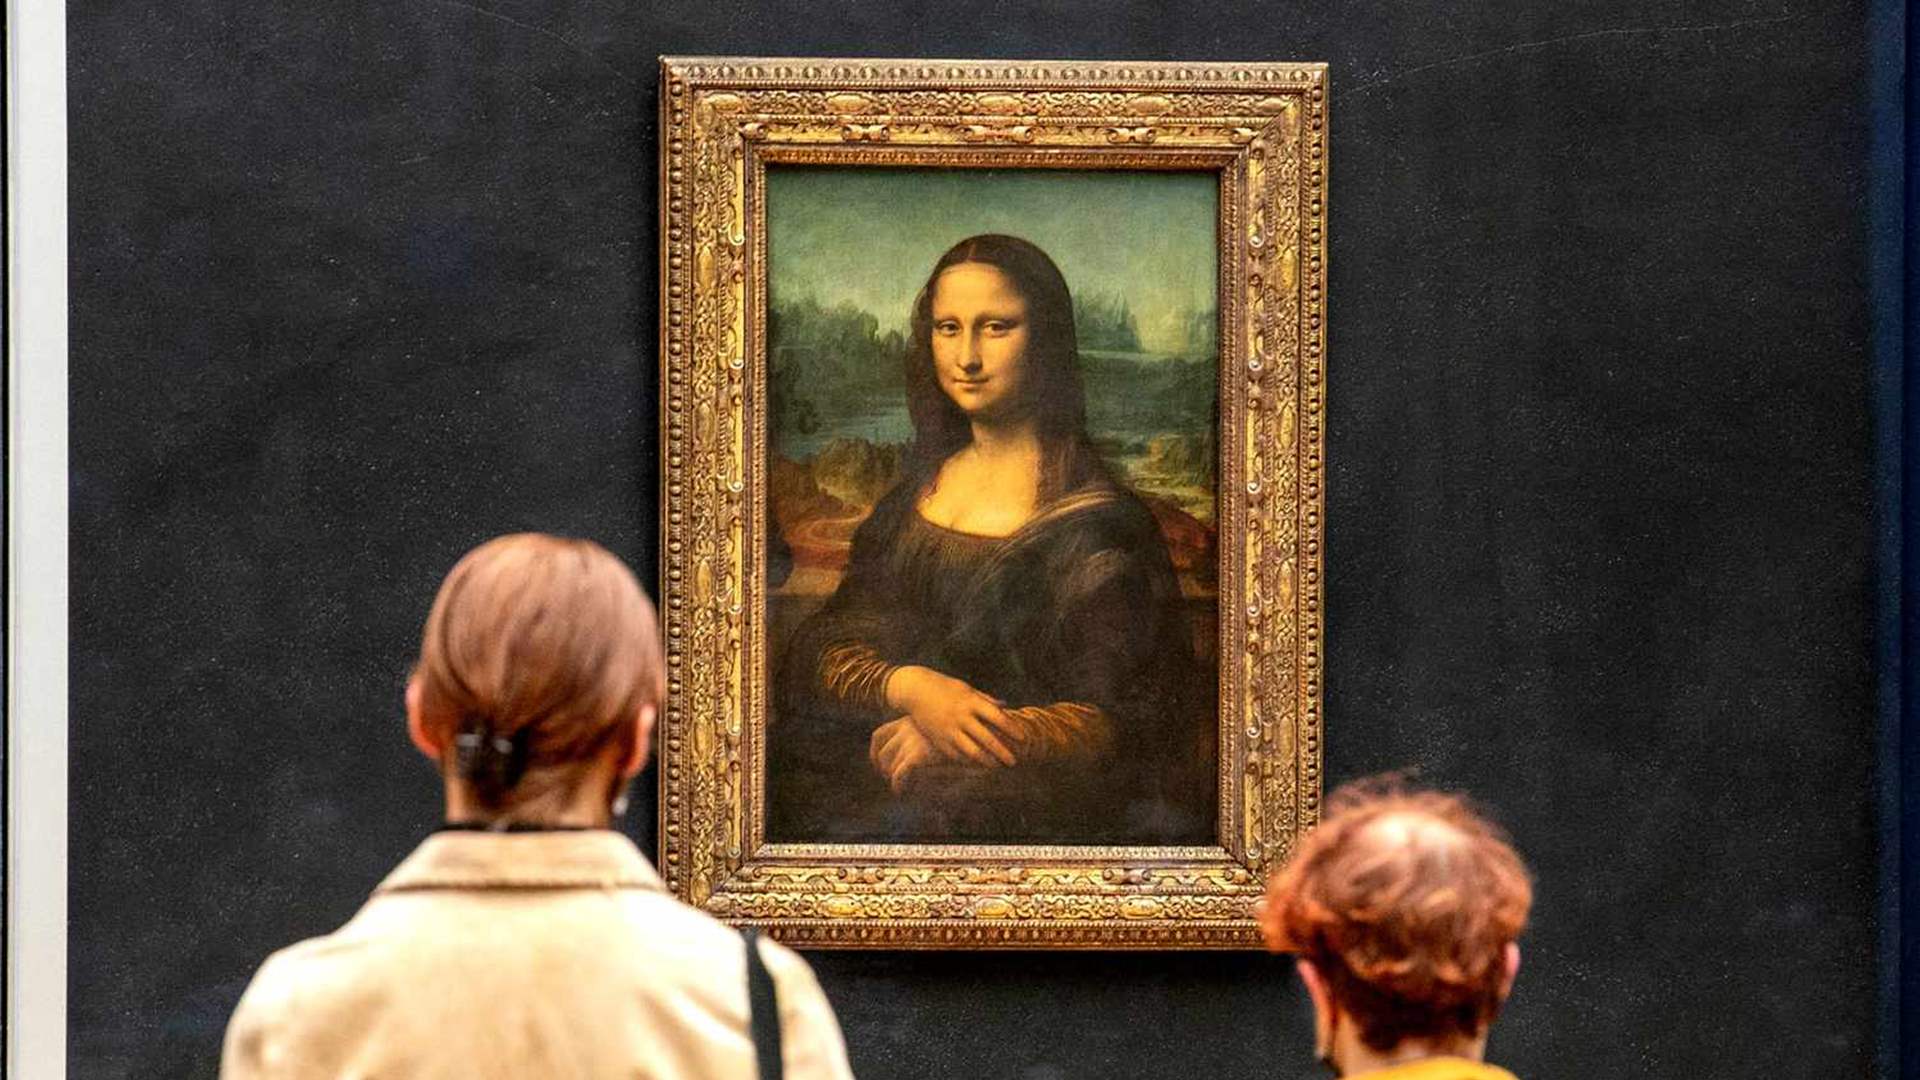 Climate change activists hurl soup at glass in front of Mona Lisa painting in Louvre museum